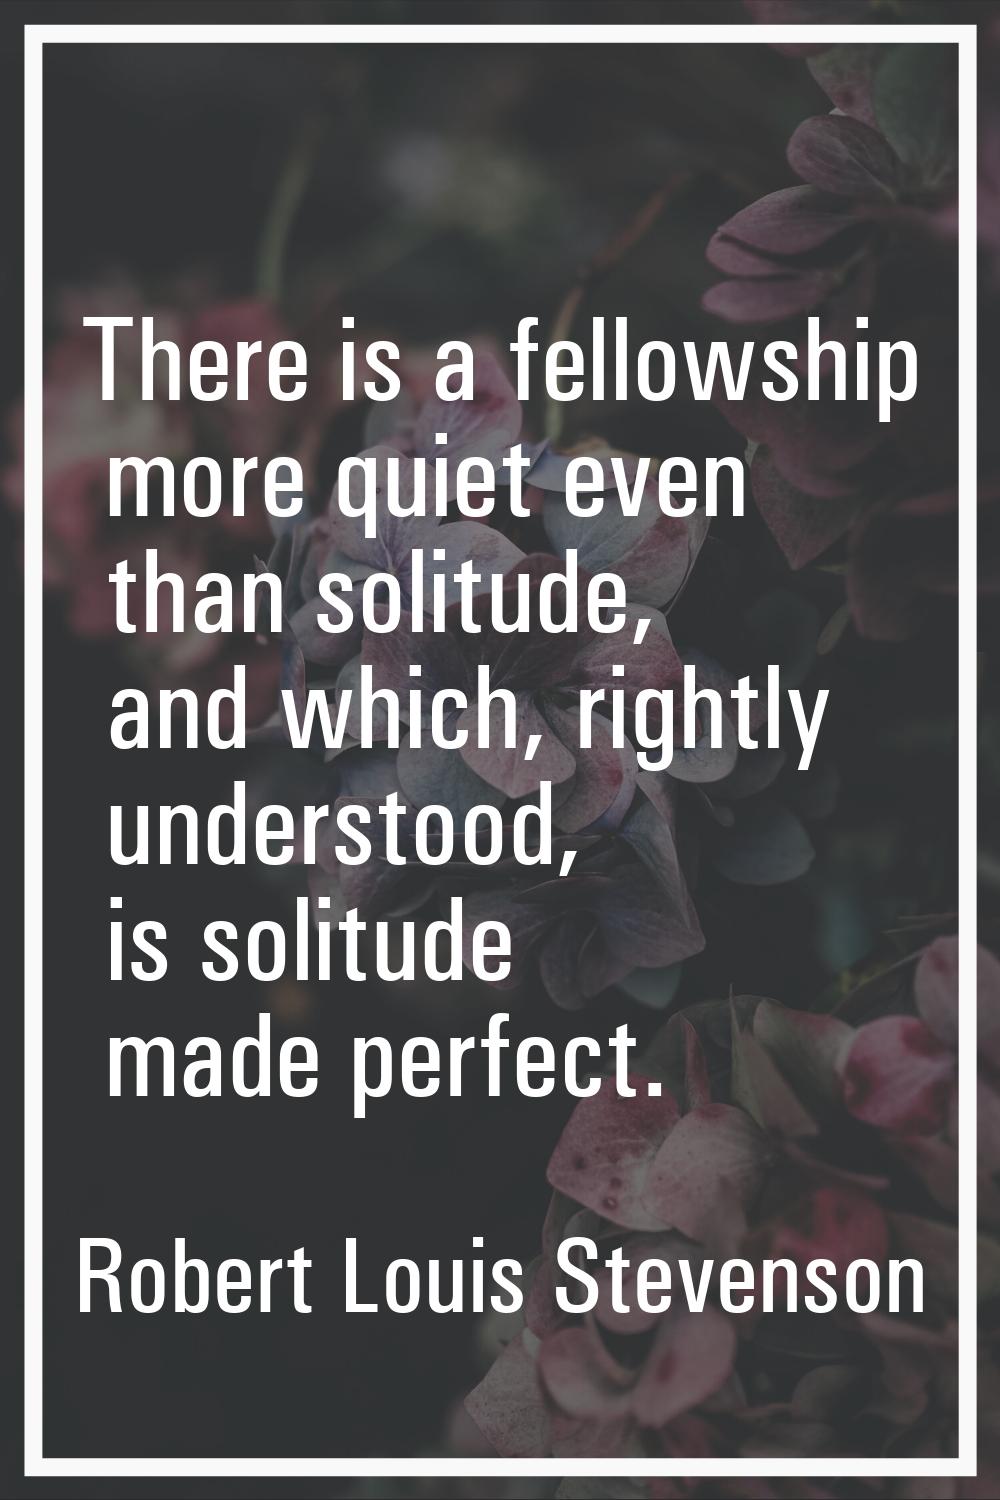 There is a fellowship more quiet even than solitude, and which, rightly understood, is solitude mad